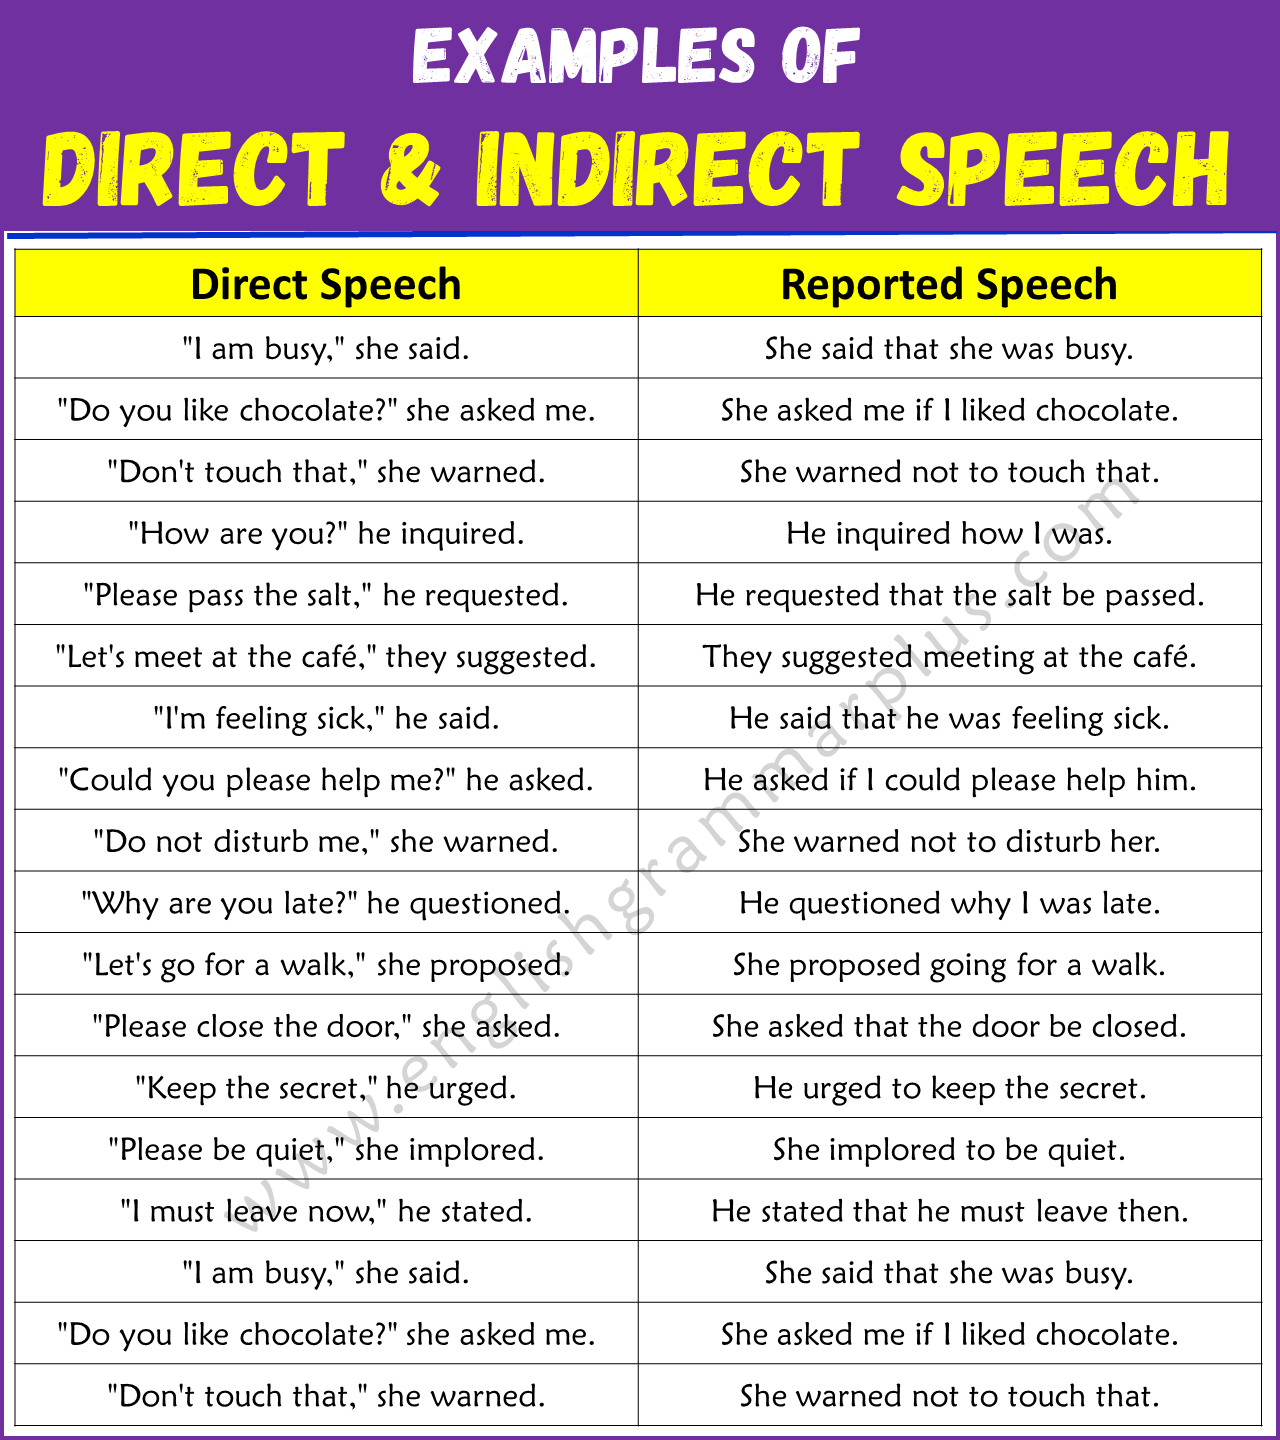 Examples of Direct & indirect Speech